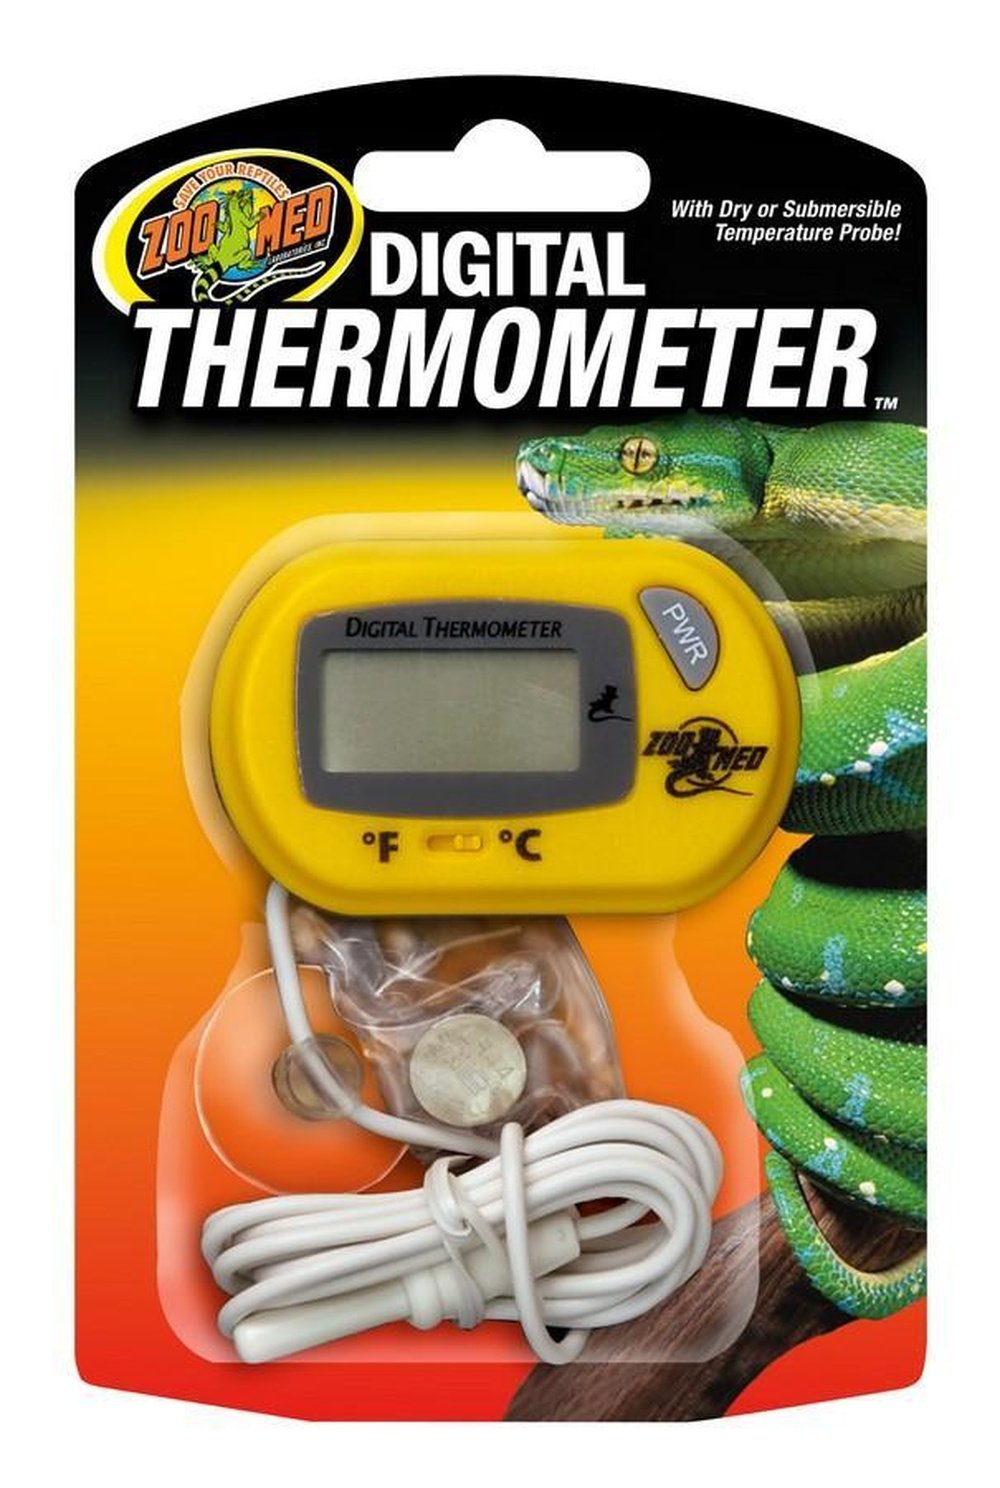 Digital Probe Thermometer Bearded Dragon Crested Gecko Reptile